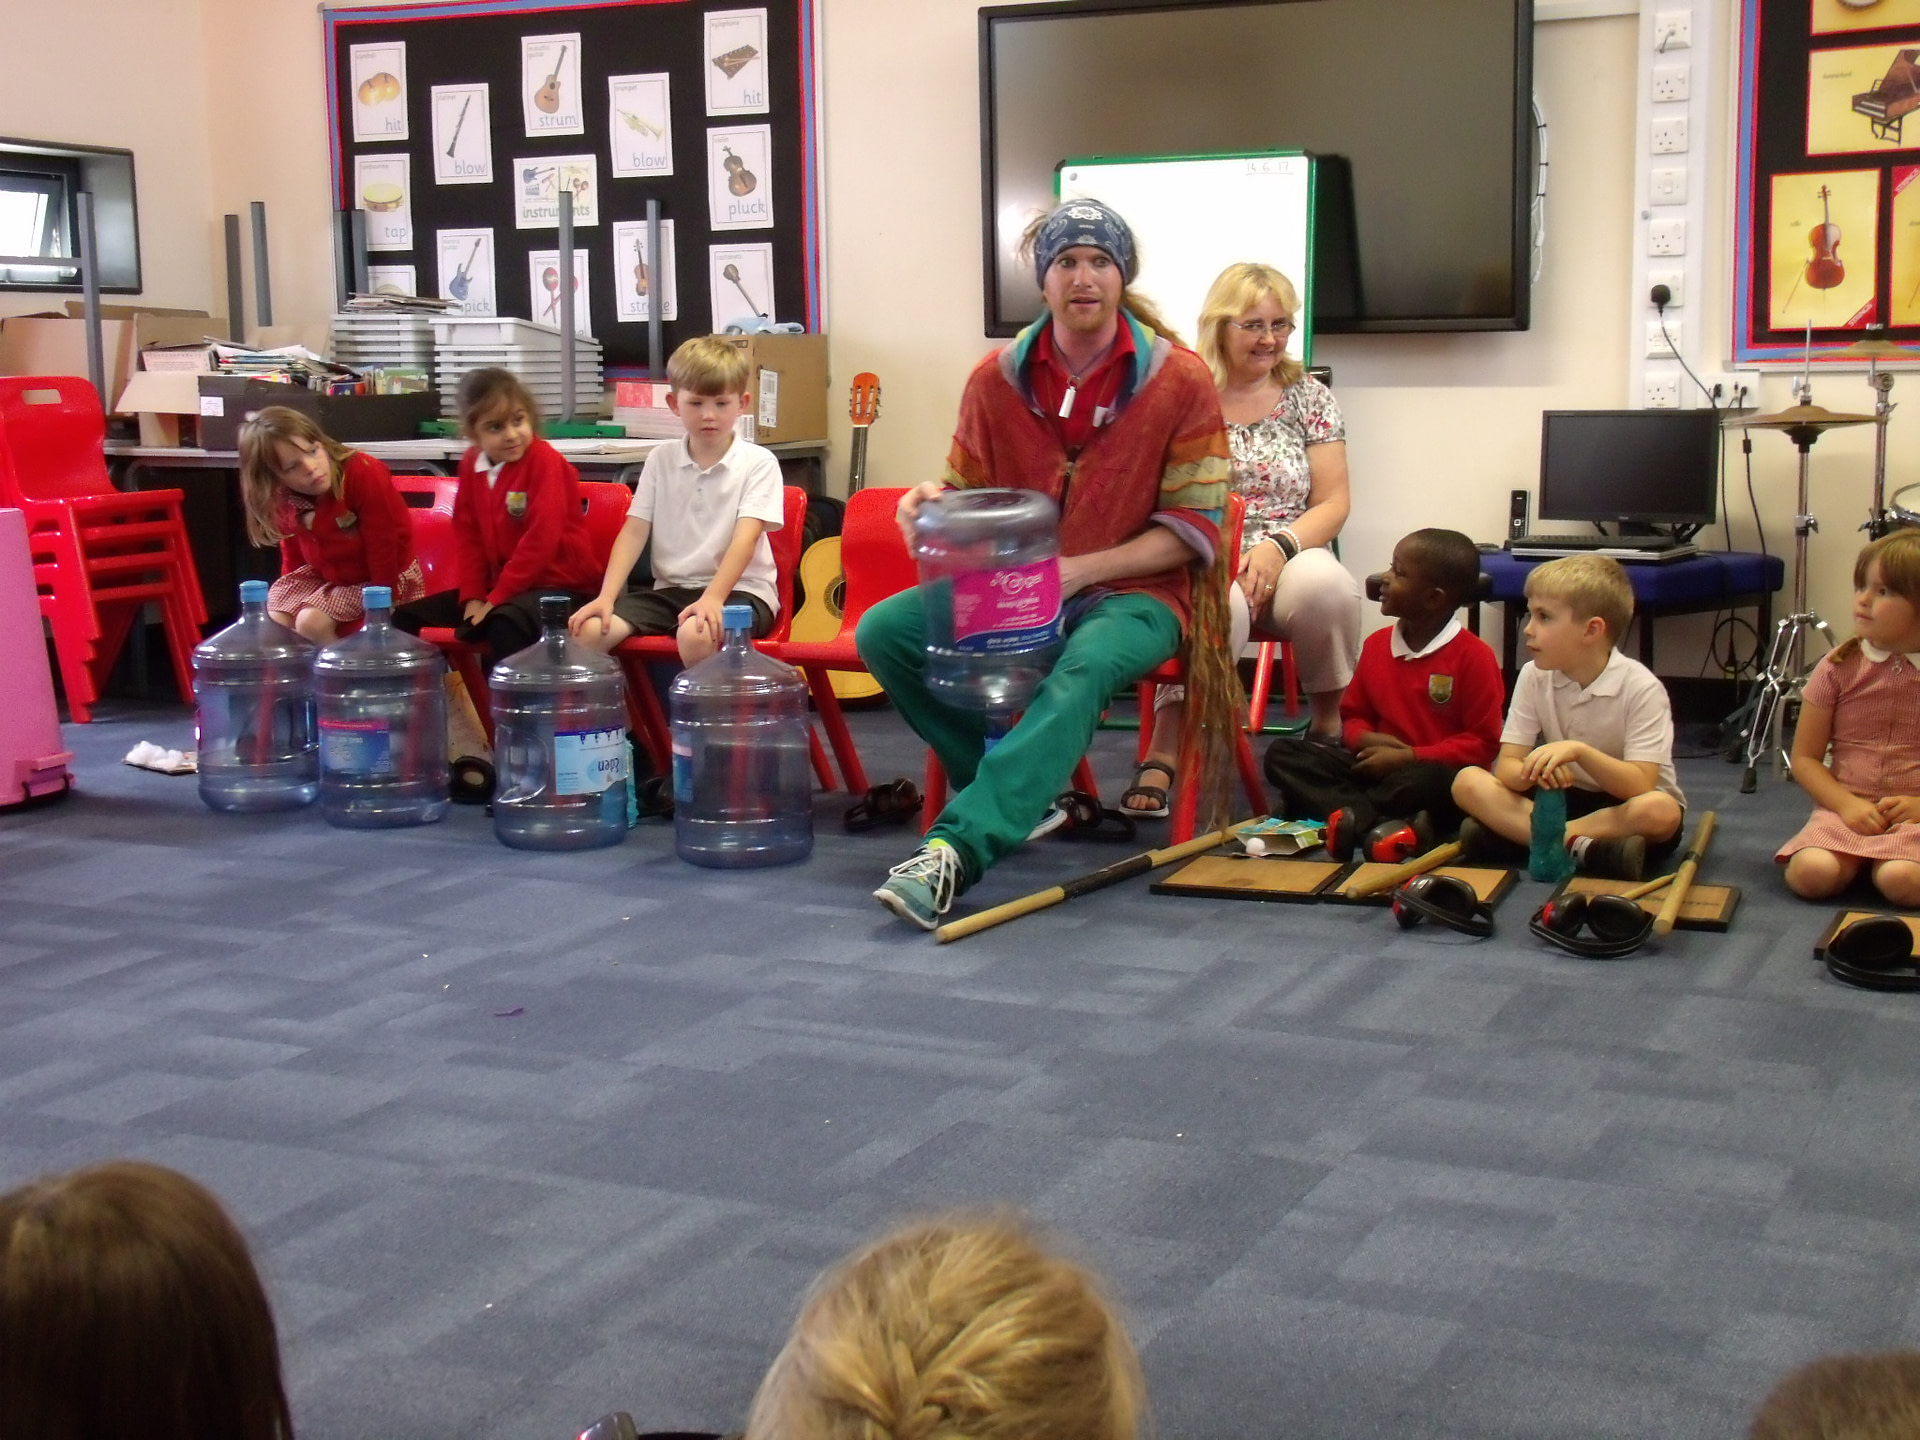 Teacher demonstrating how to play musical instruments made out of bottles